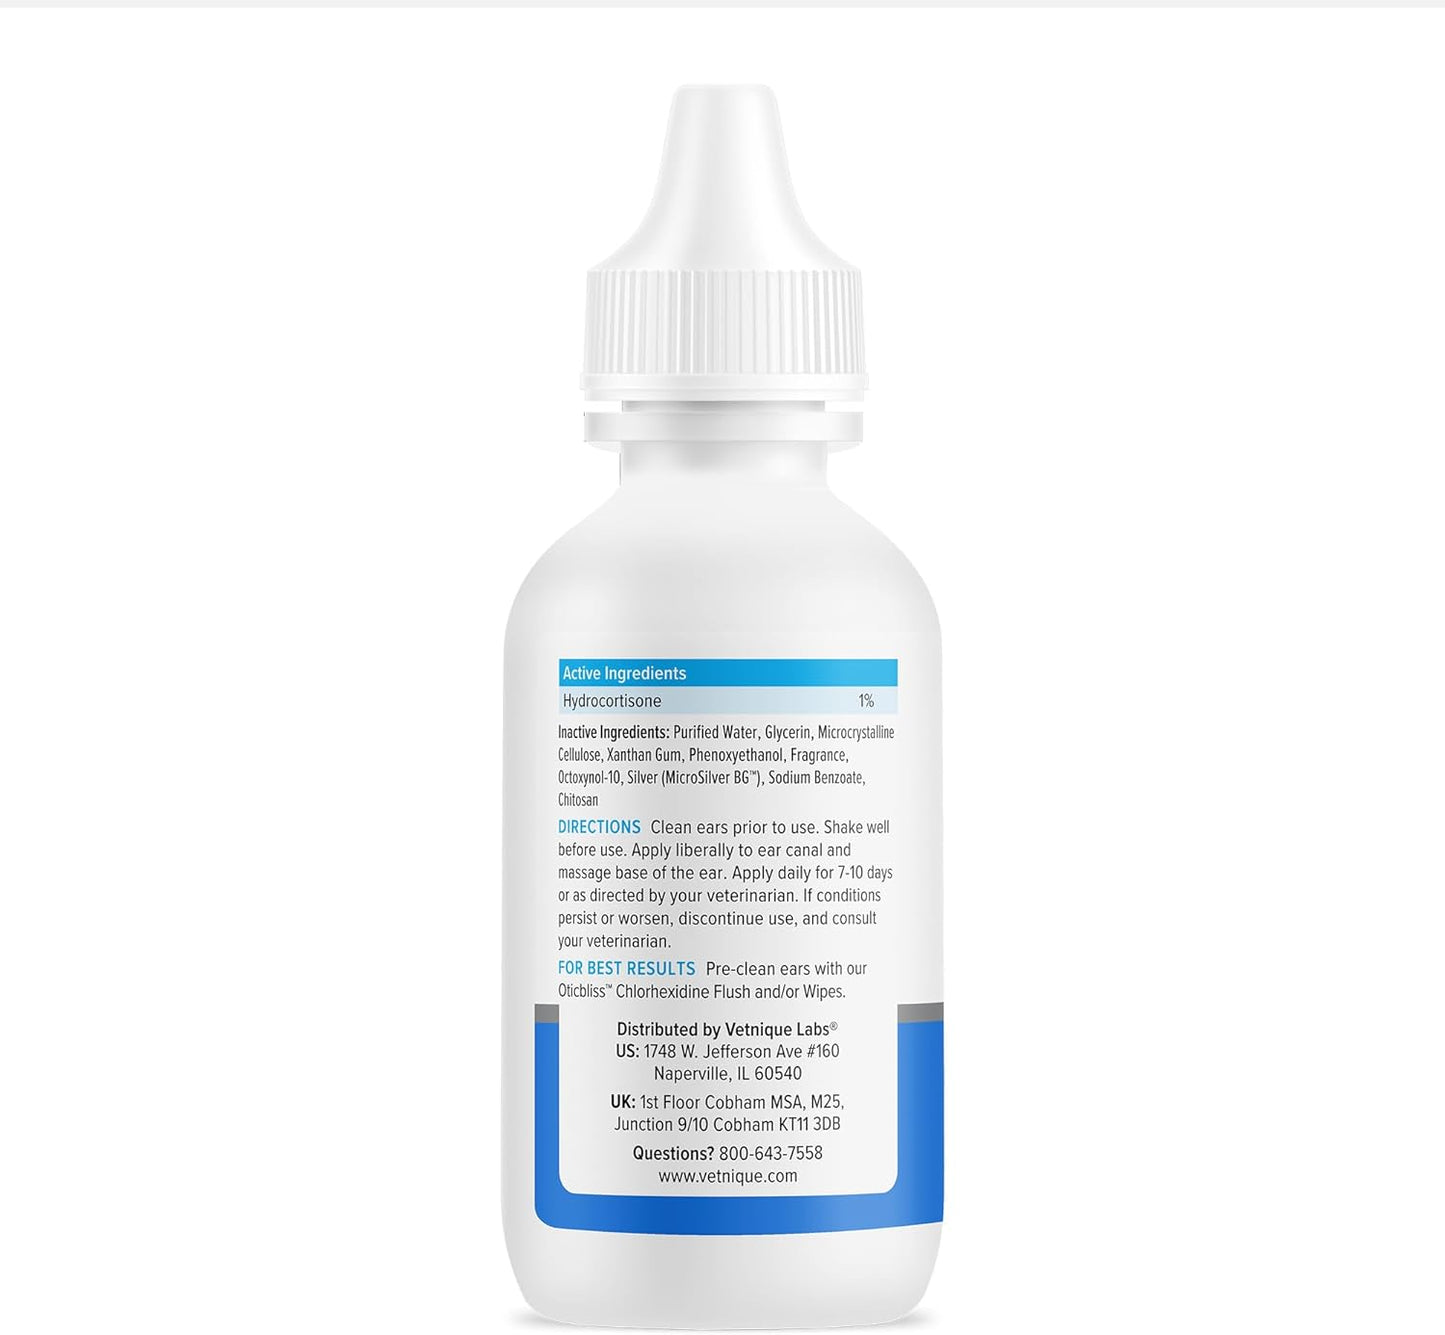 Vetnique Labs Oticbliss Vet-Strength Ear Drops for Dogs & Cats with MicroSilver BG & 1% Hydrocortisone Soothing Relief for Irritated Ears Dog Ear Cleaner, Alcohol-Free Ear Drops with Chitosan 1.8oz